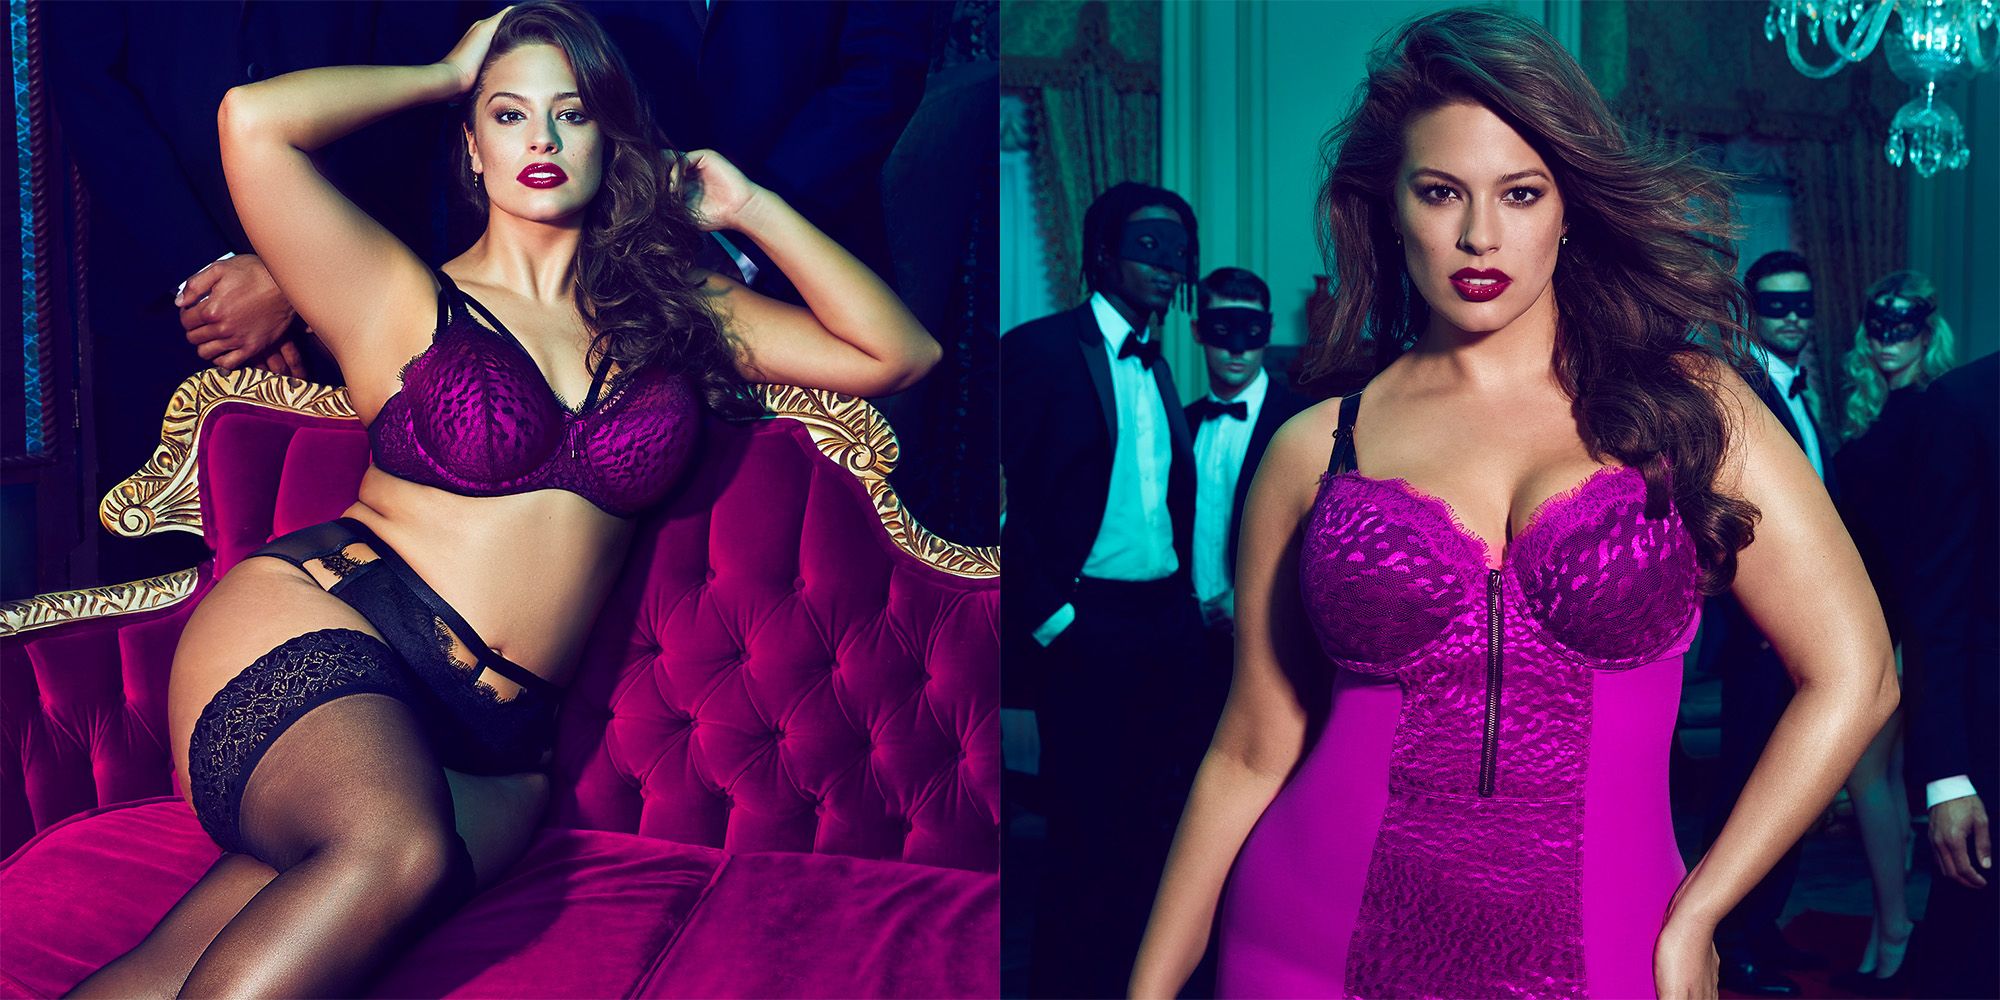 ashley-graham-lingerie-show-1505212940 - Advice from Influencers